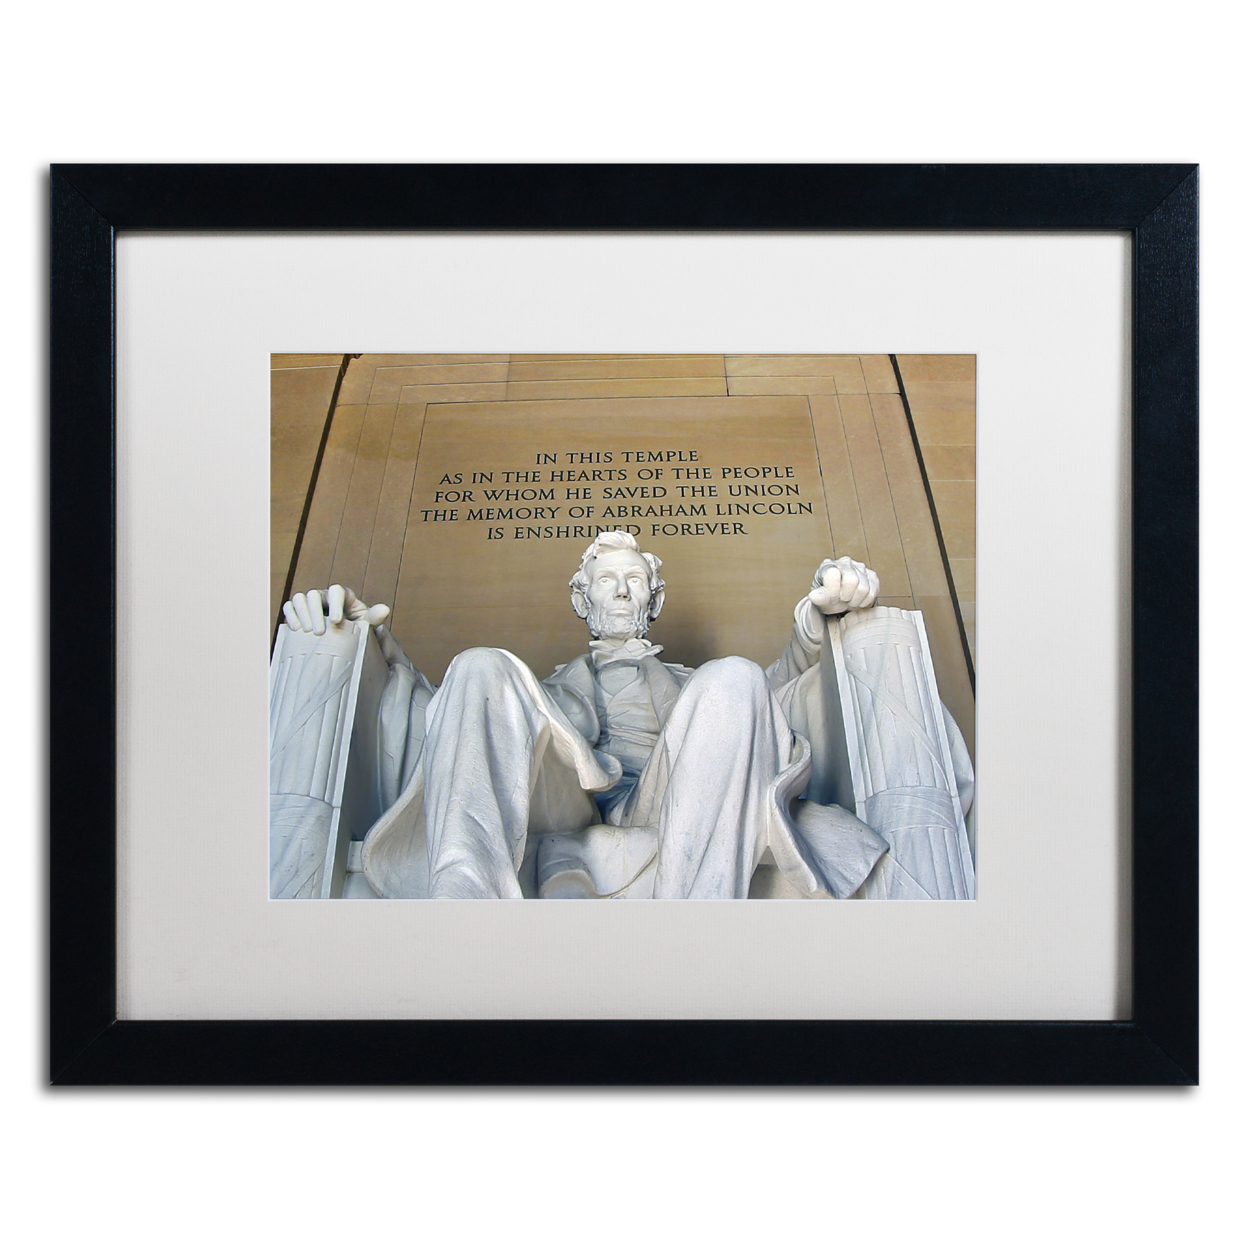 CATeyes 'Lincoln Memorial' Black Wooden Framed Art 18 X 22 Inches